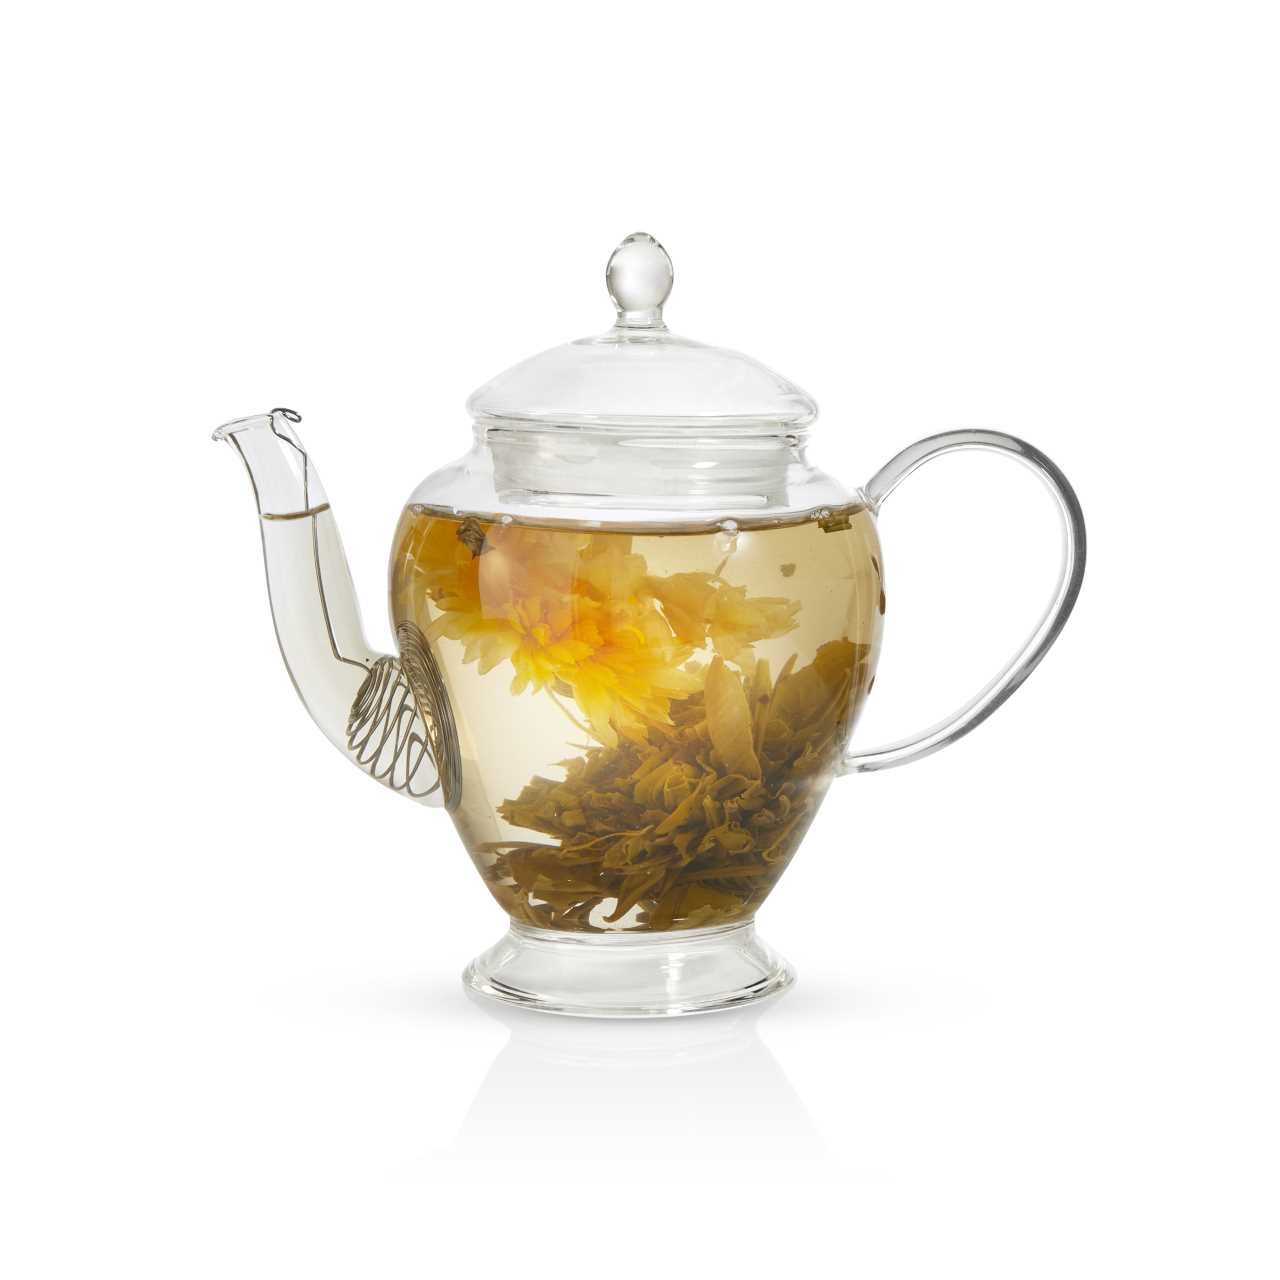 Classic Glass Teapot With Coil Infuser - 450ml with flowering tea brewed